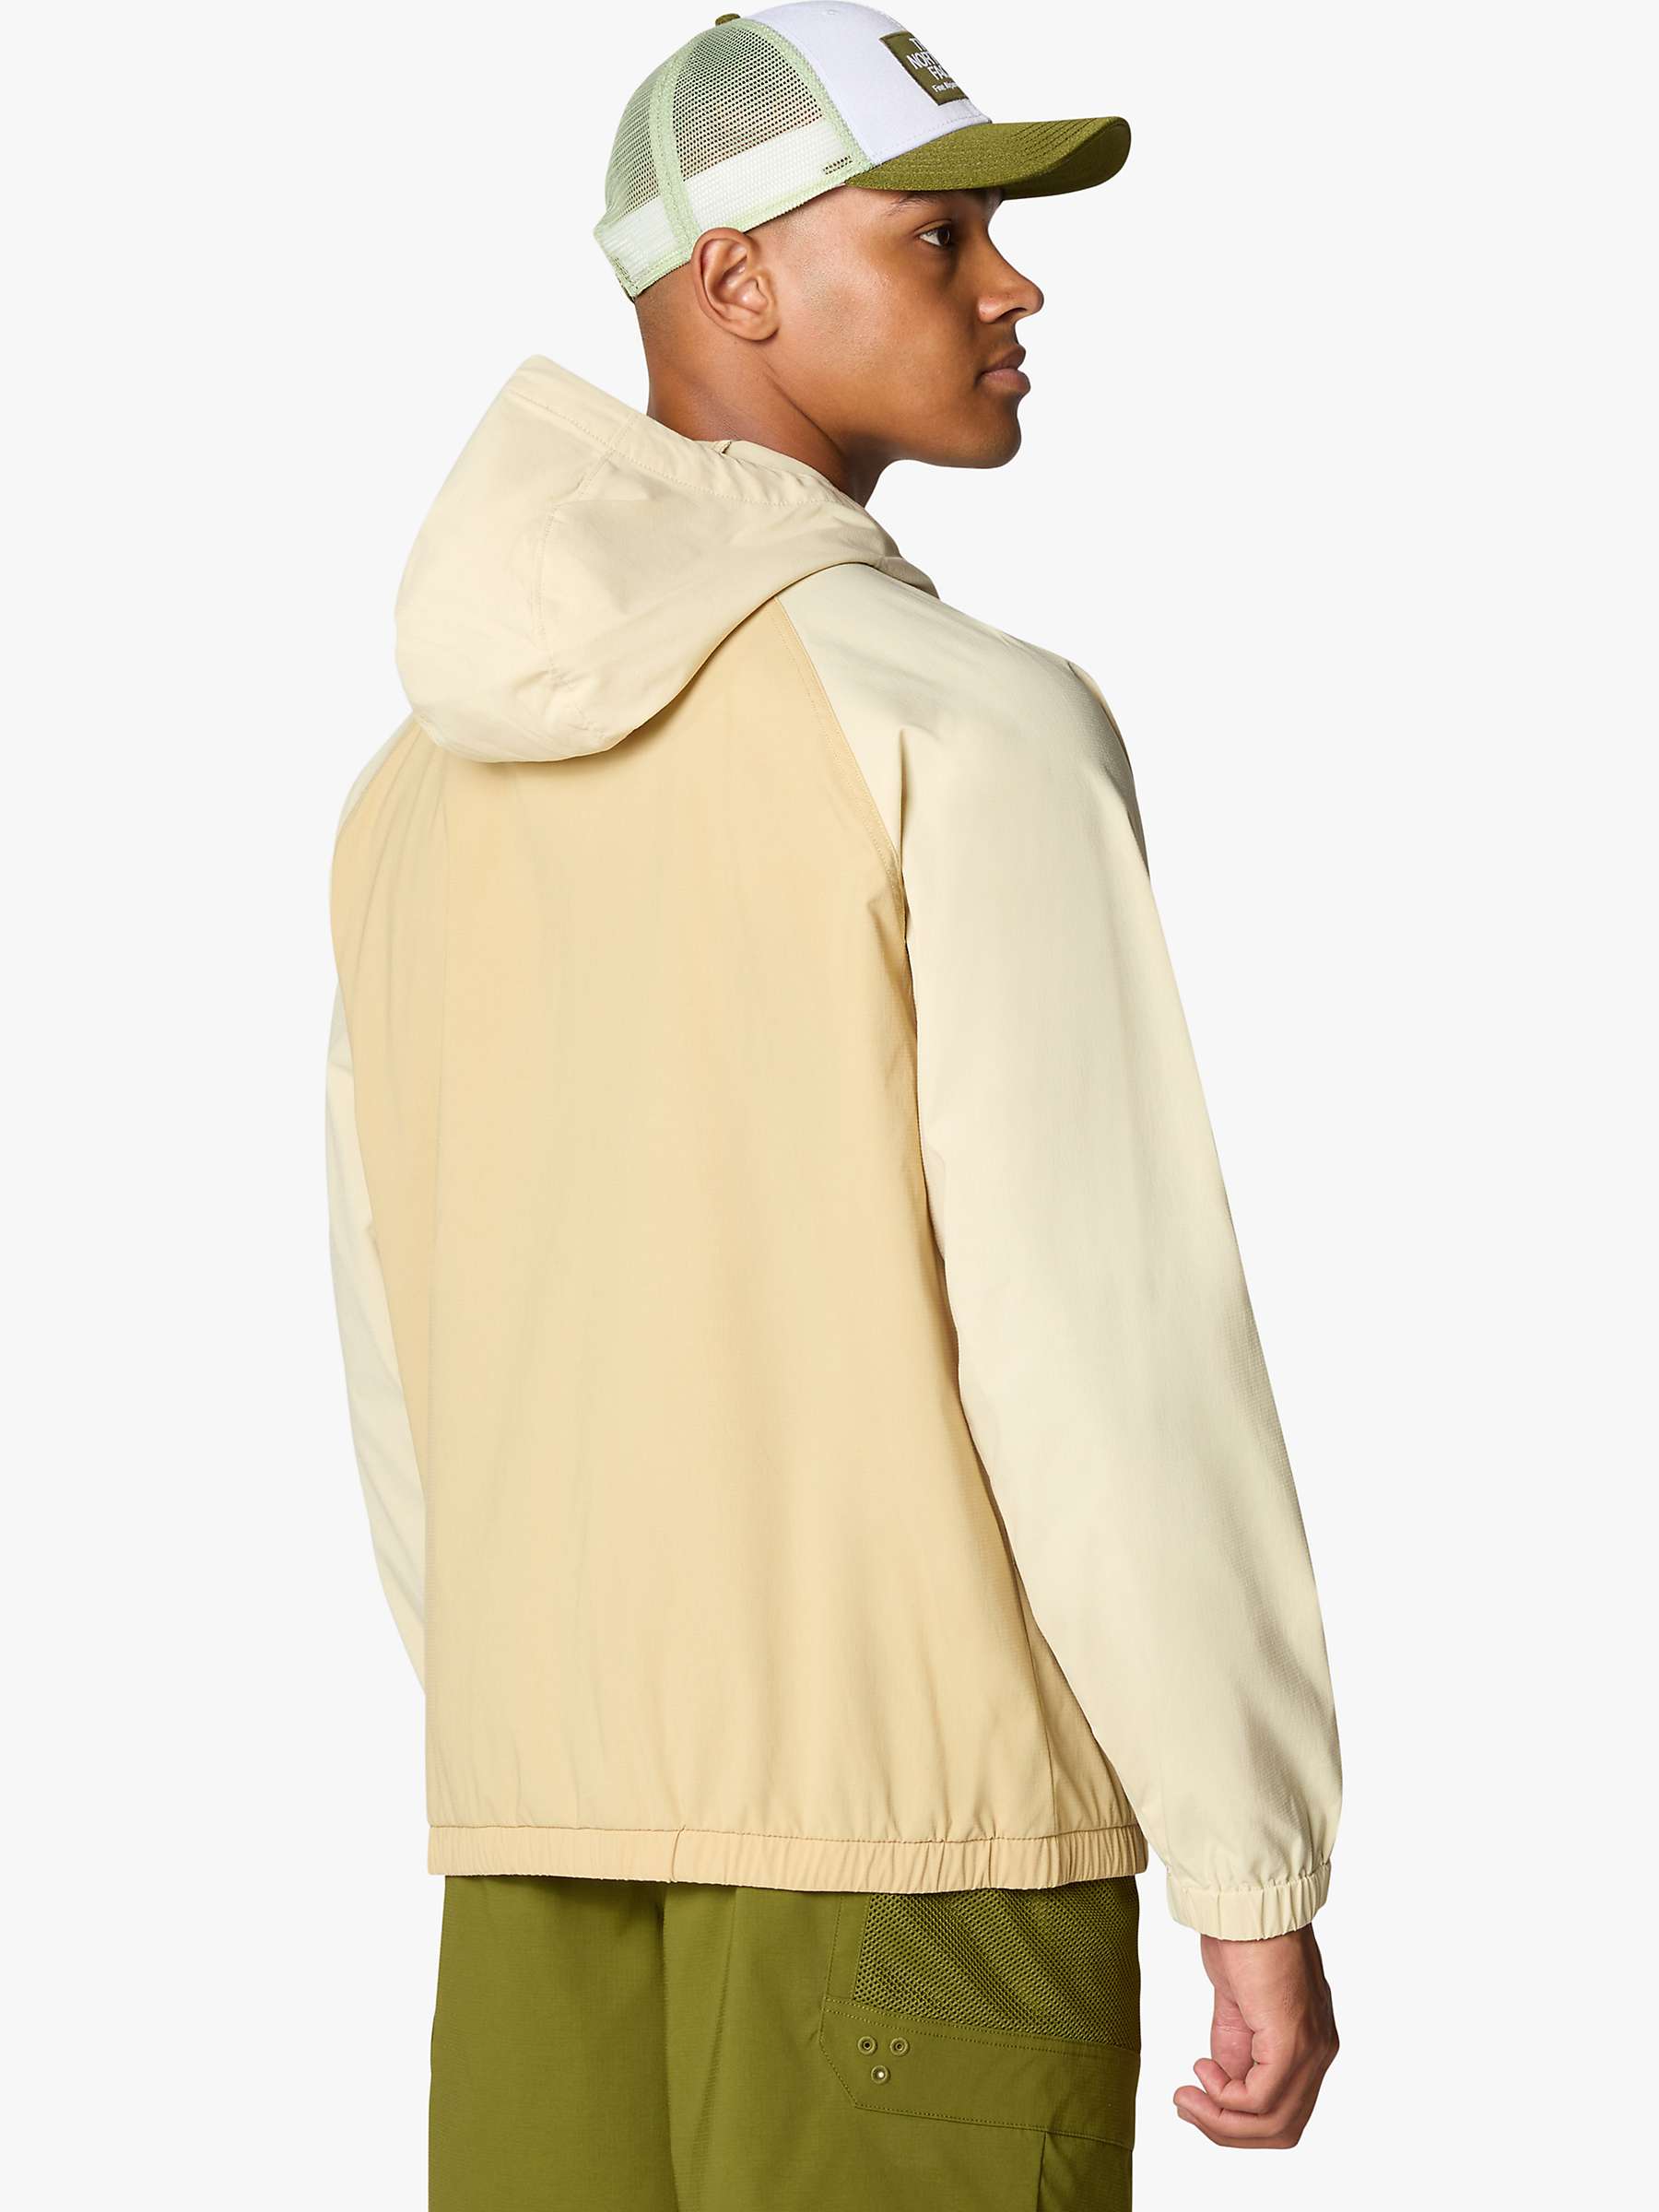 Buy The North Face Path Relaxed Fit Pullover Jacket, Gravel/Khaki/Stone Online at johnlewis.com